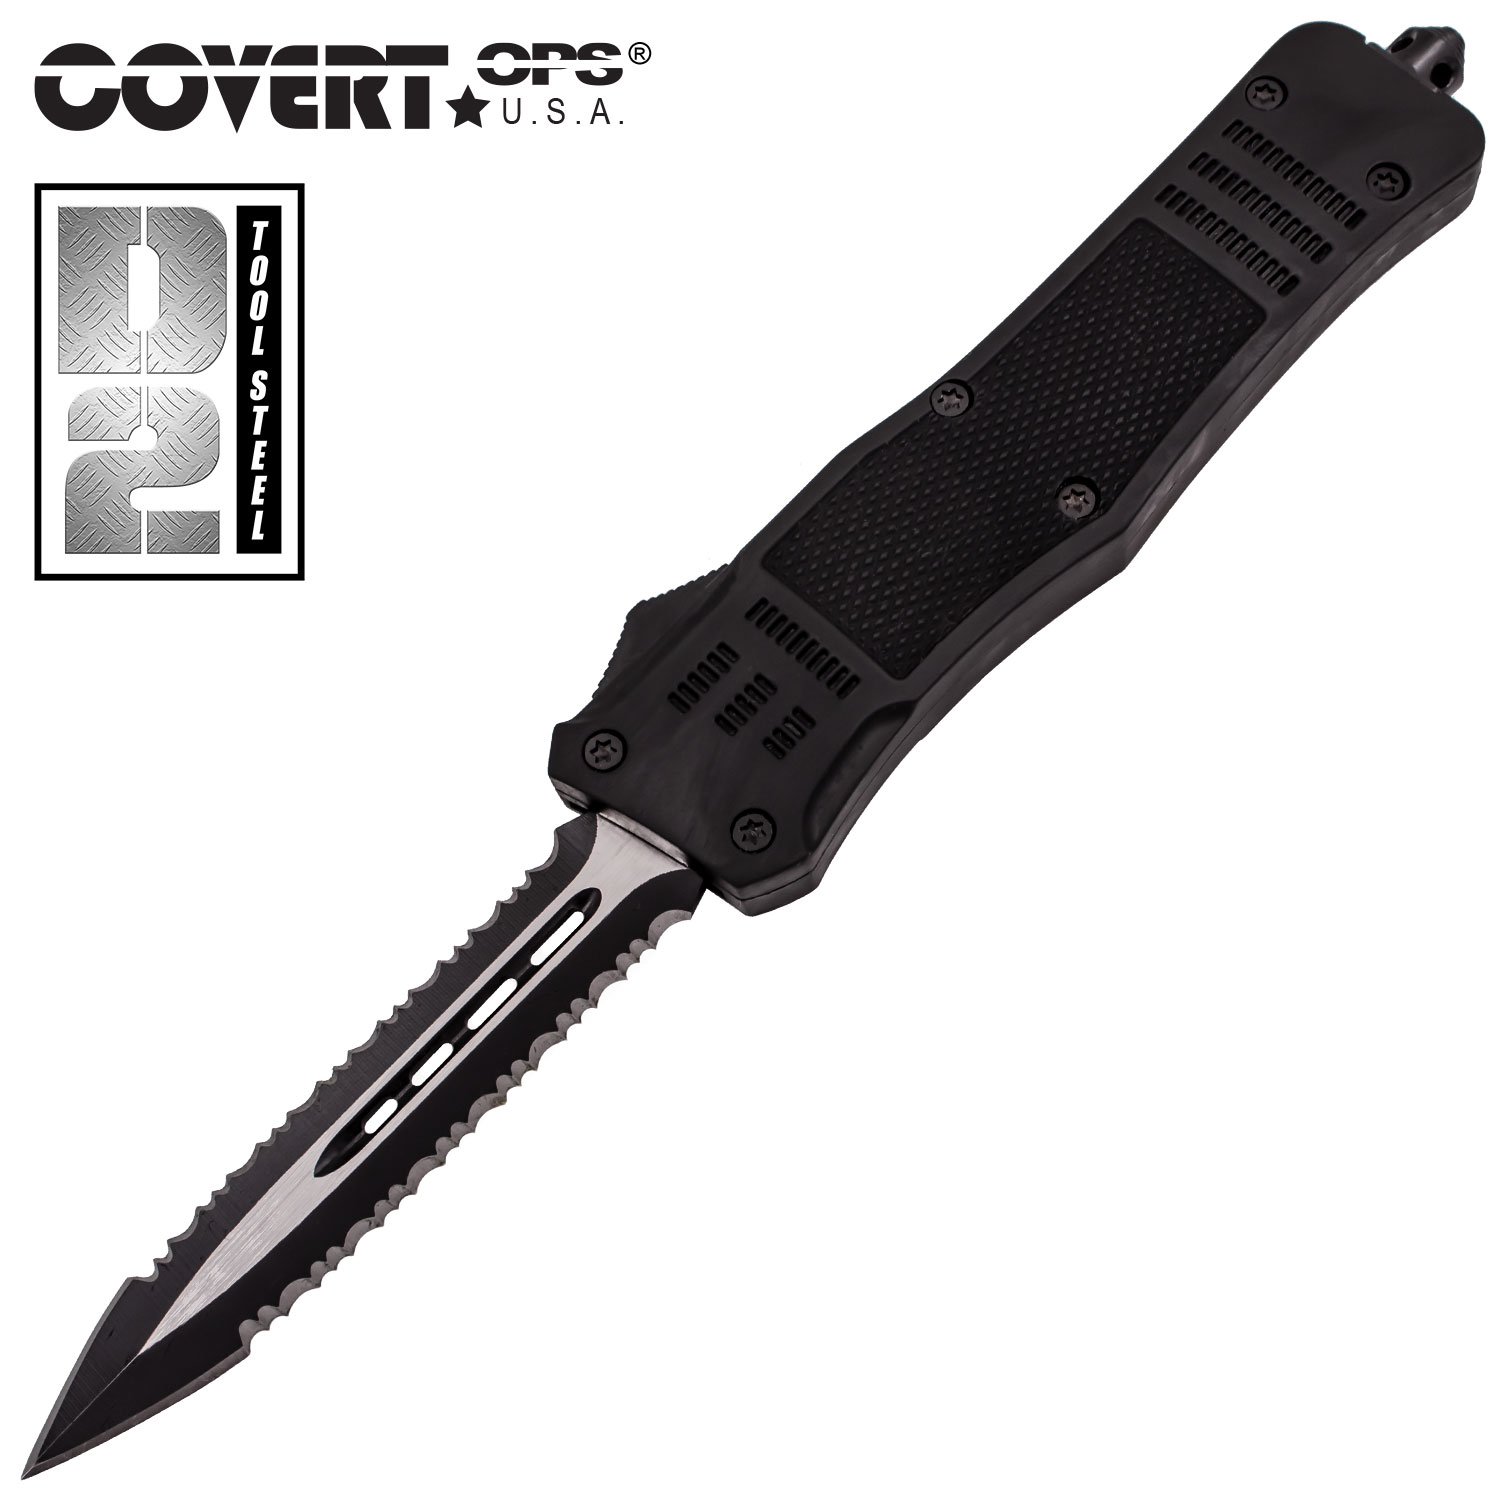 Covert OPS USA OTF Automatic Knife 9 inch Black D2 Steel Blade DSerr